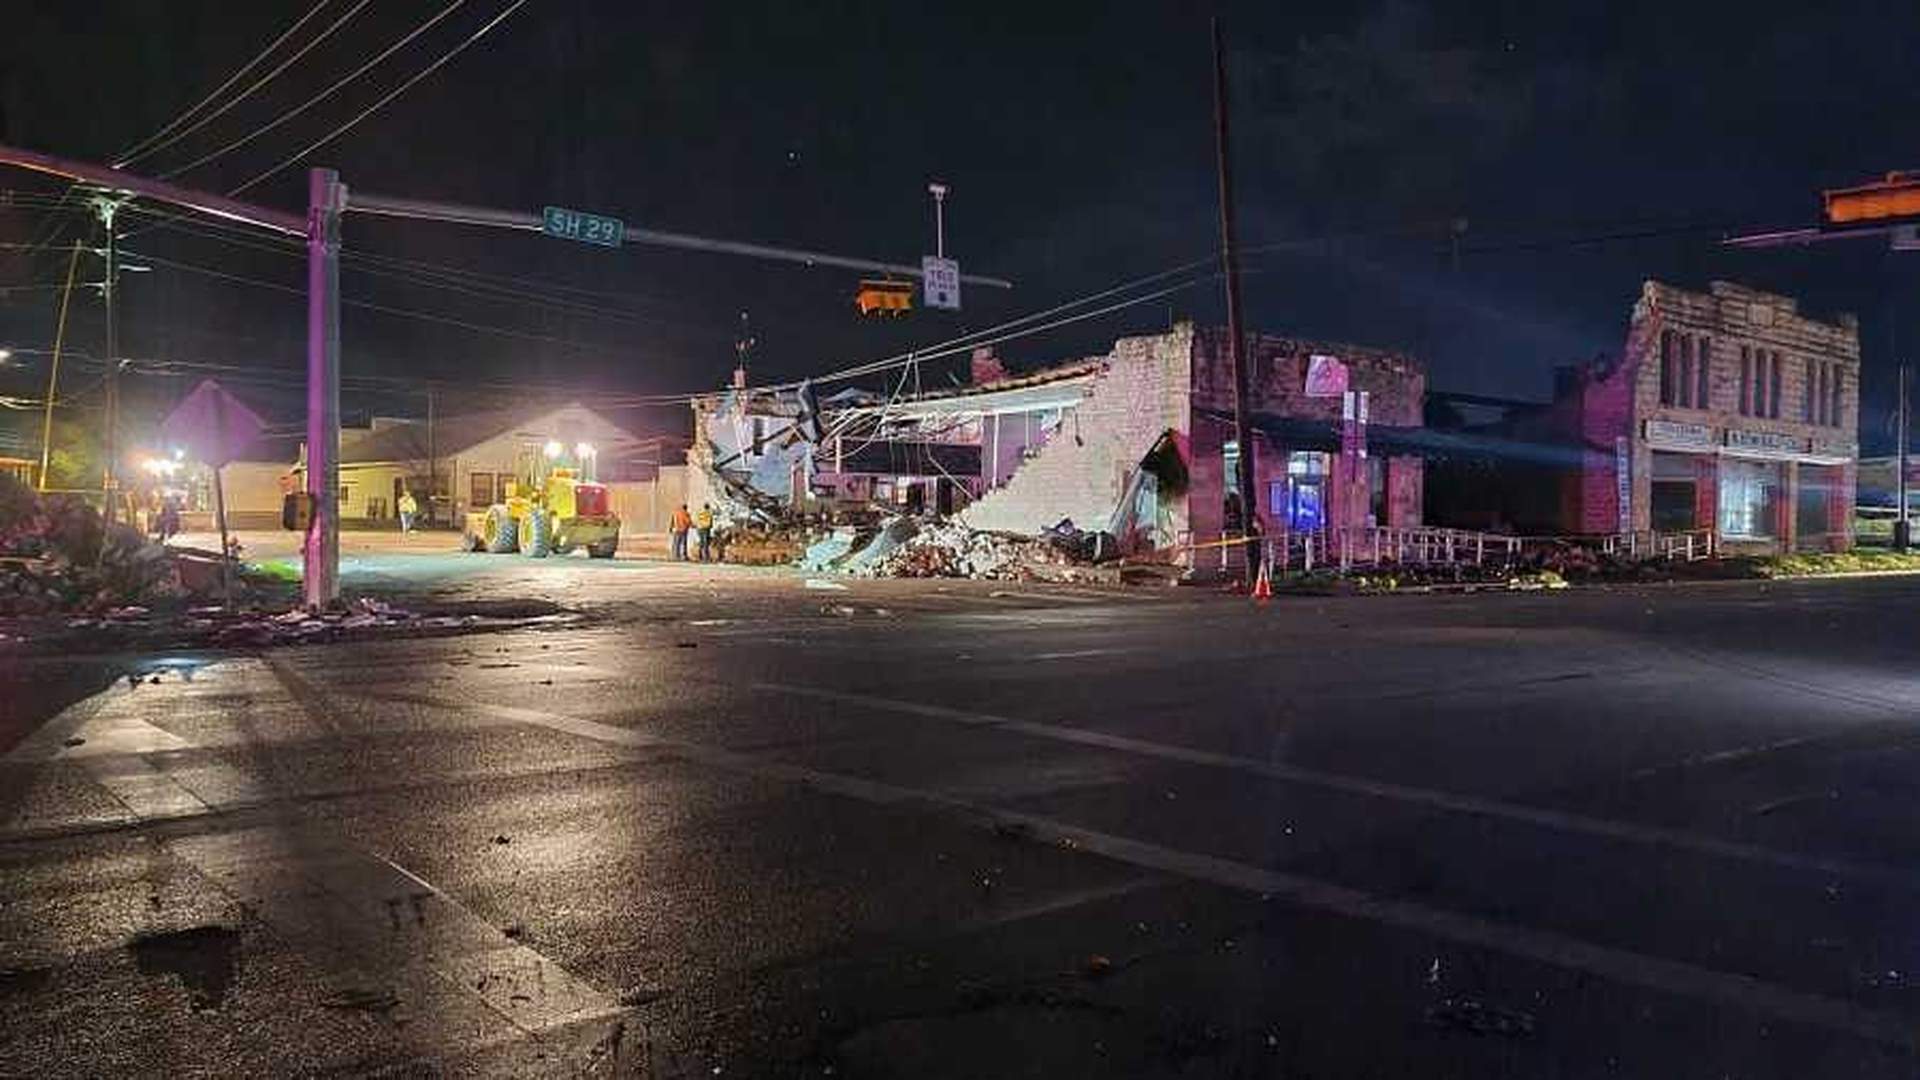 Springtime storms cause damage in central Texas city